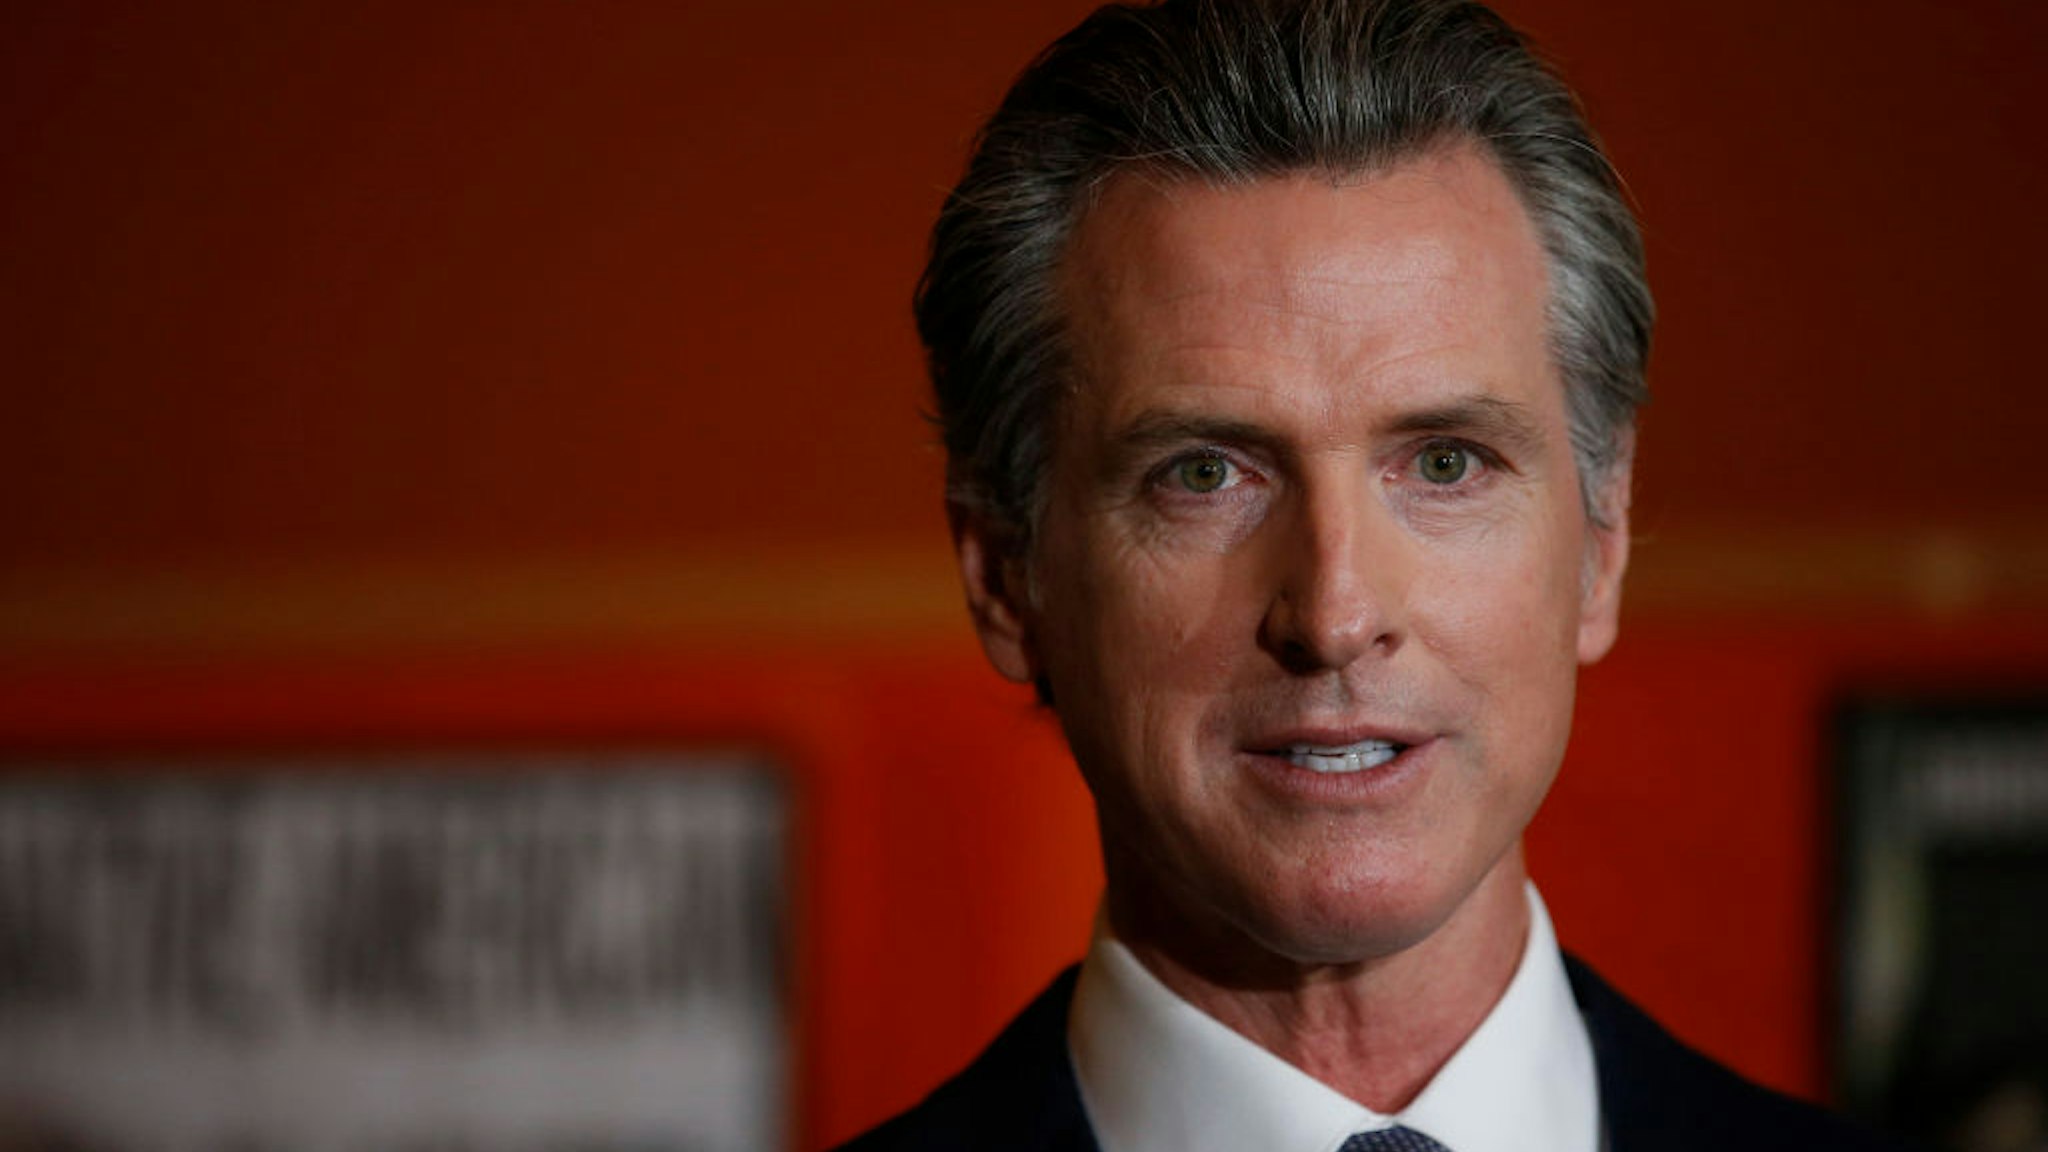 Gov. Gavin Newsom takes questions from the media during a press conference at the Native American Health Center in Oakland, Calif., on Wednesday, Dec. 22, 2021.